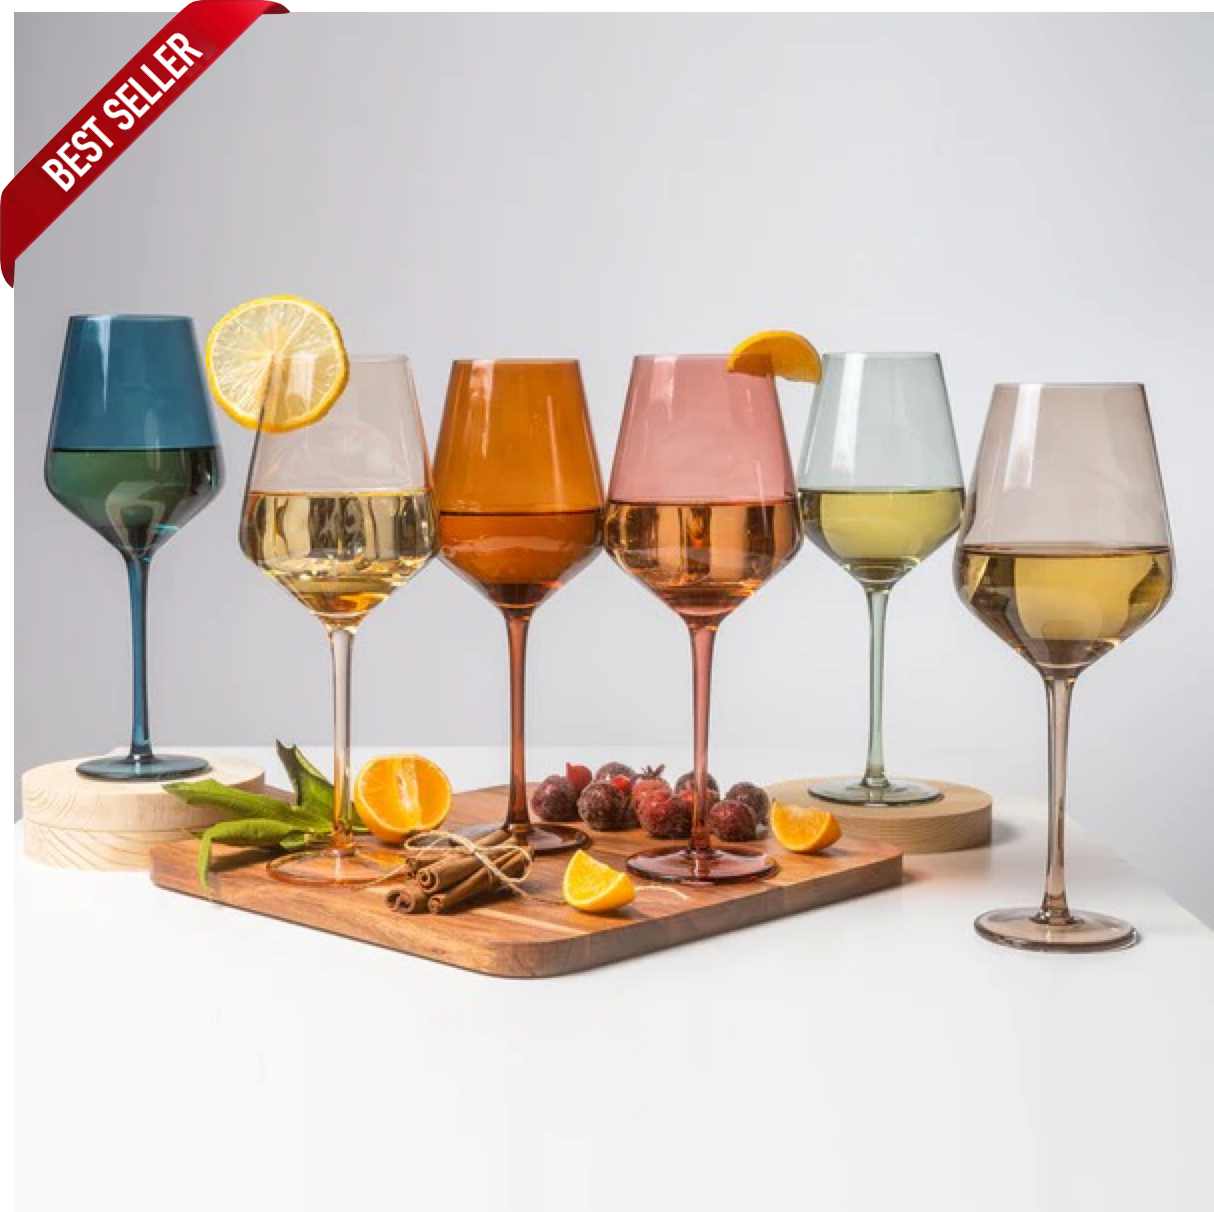 Saludi Colored Wine Glasses, 16.5oz (Set of 6) Stemmed Multi-Color Glass - Great for All Wine Types and Occasions - Luxury, Durable, Hand-Blown